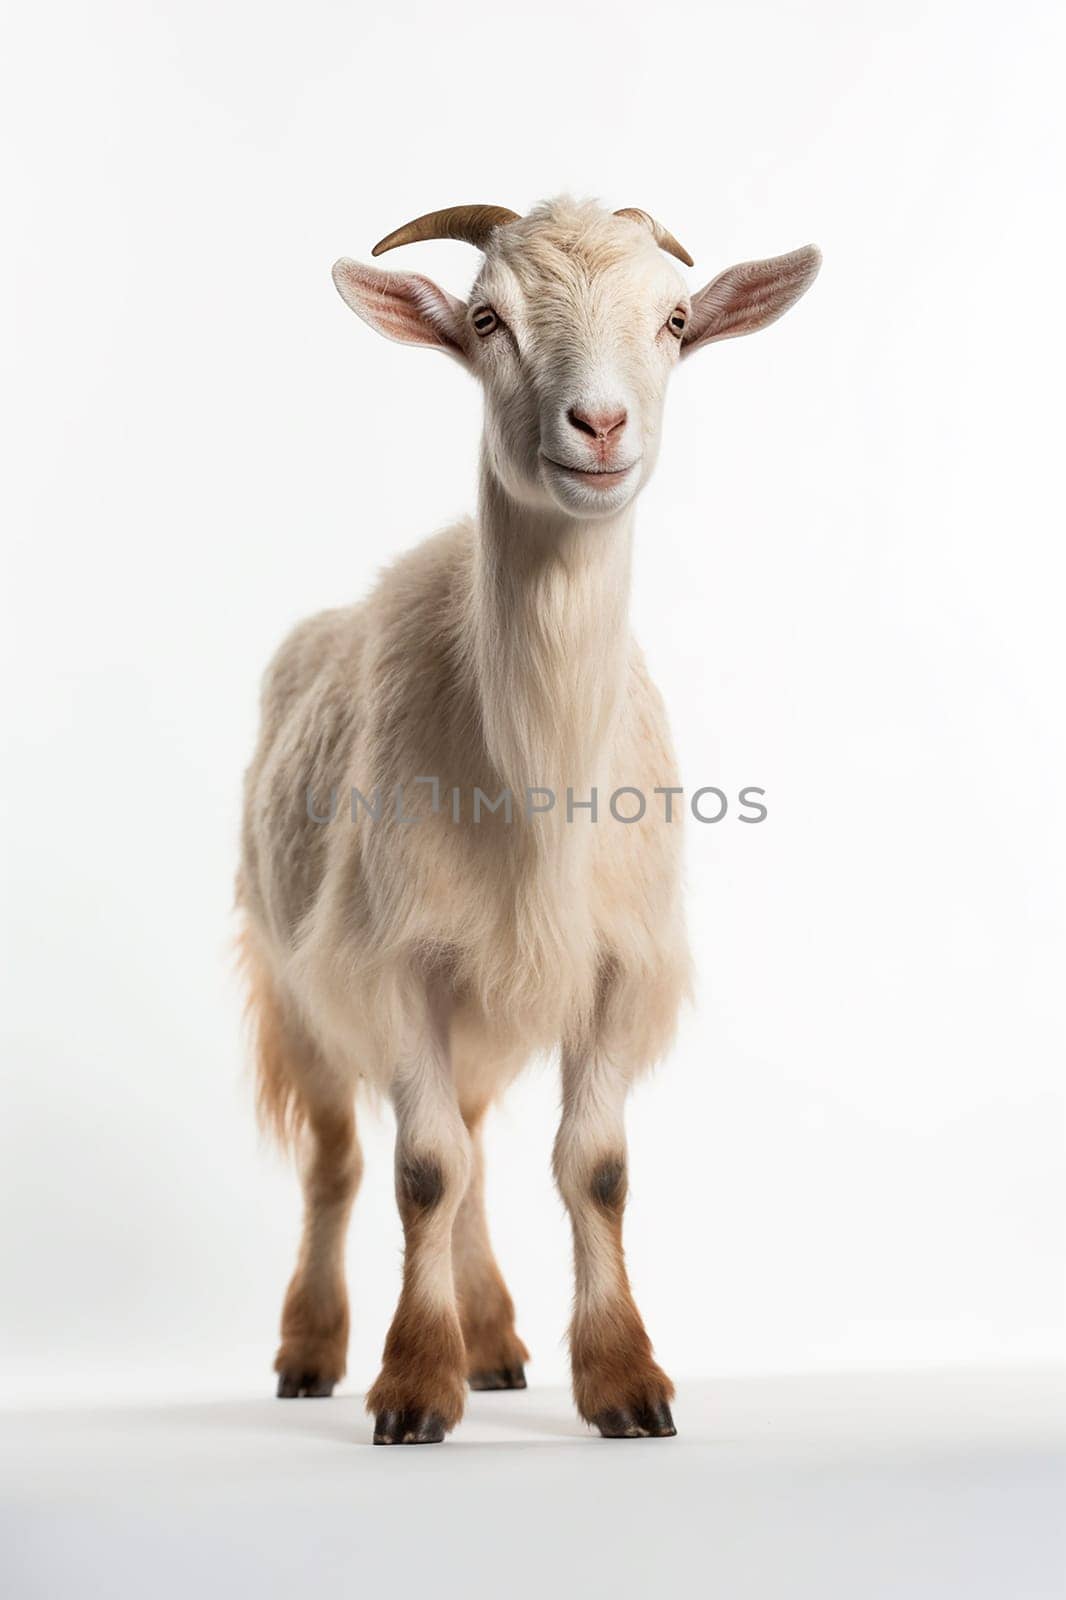 A photo of a farm animal, white goat on white background by Hype2art